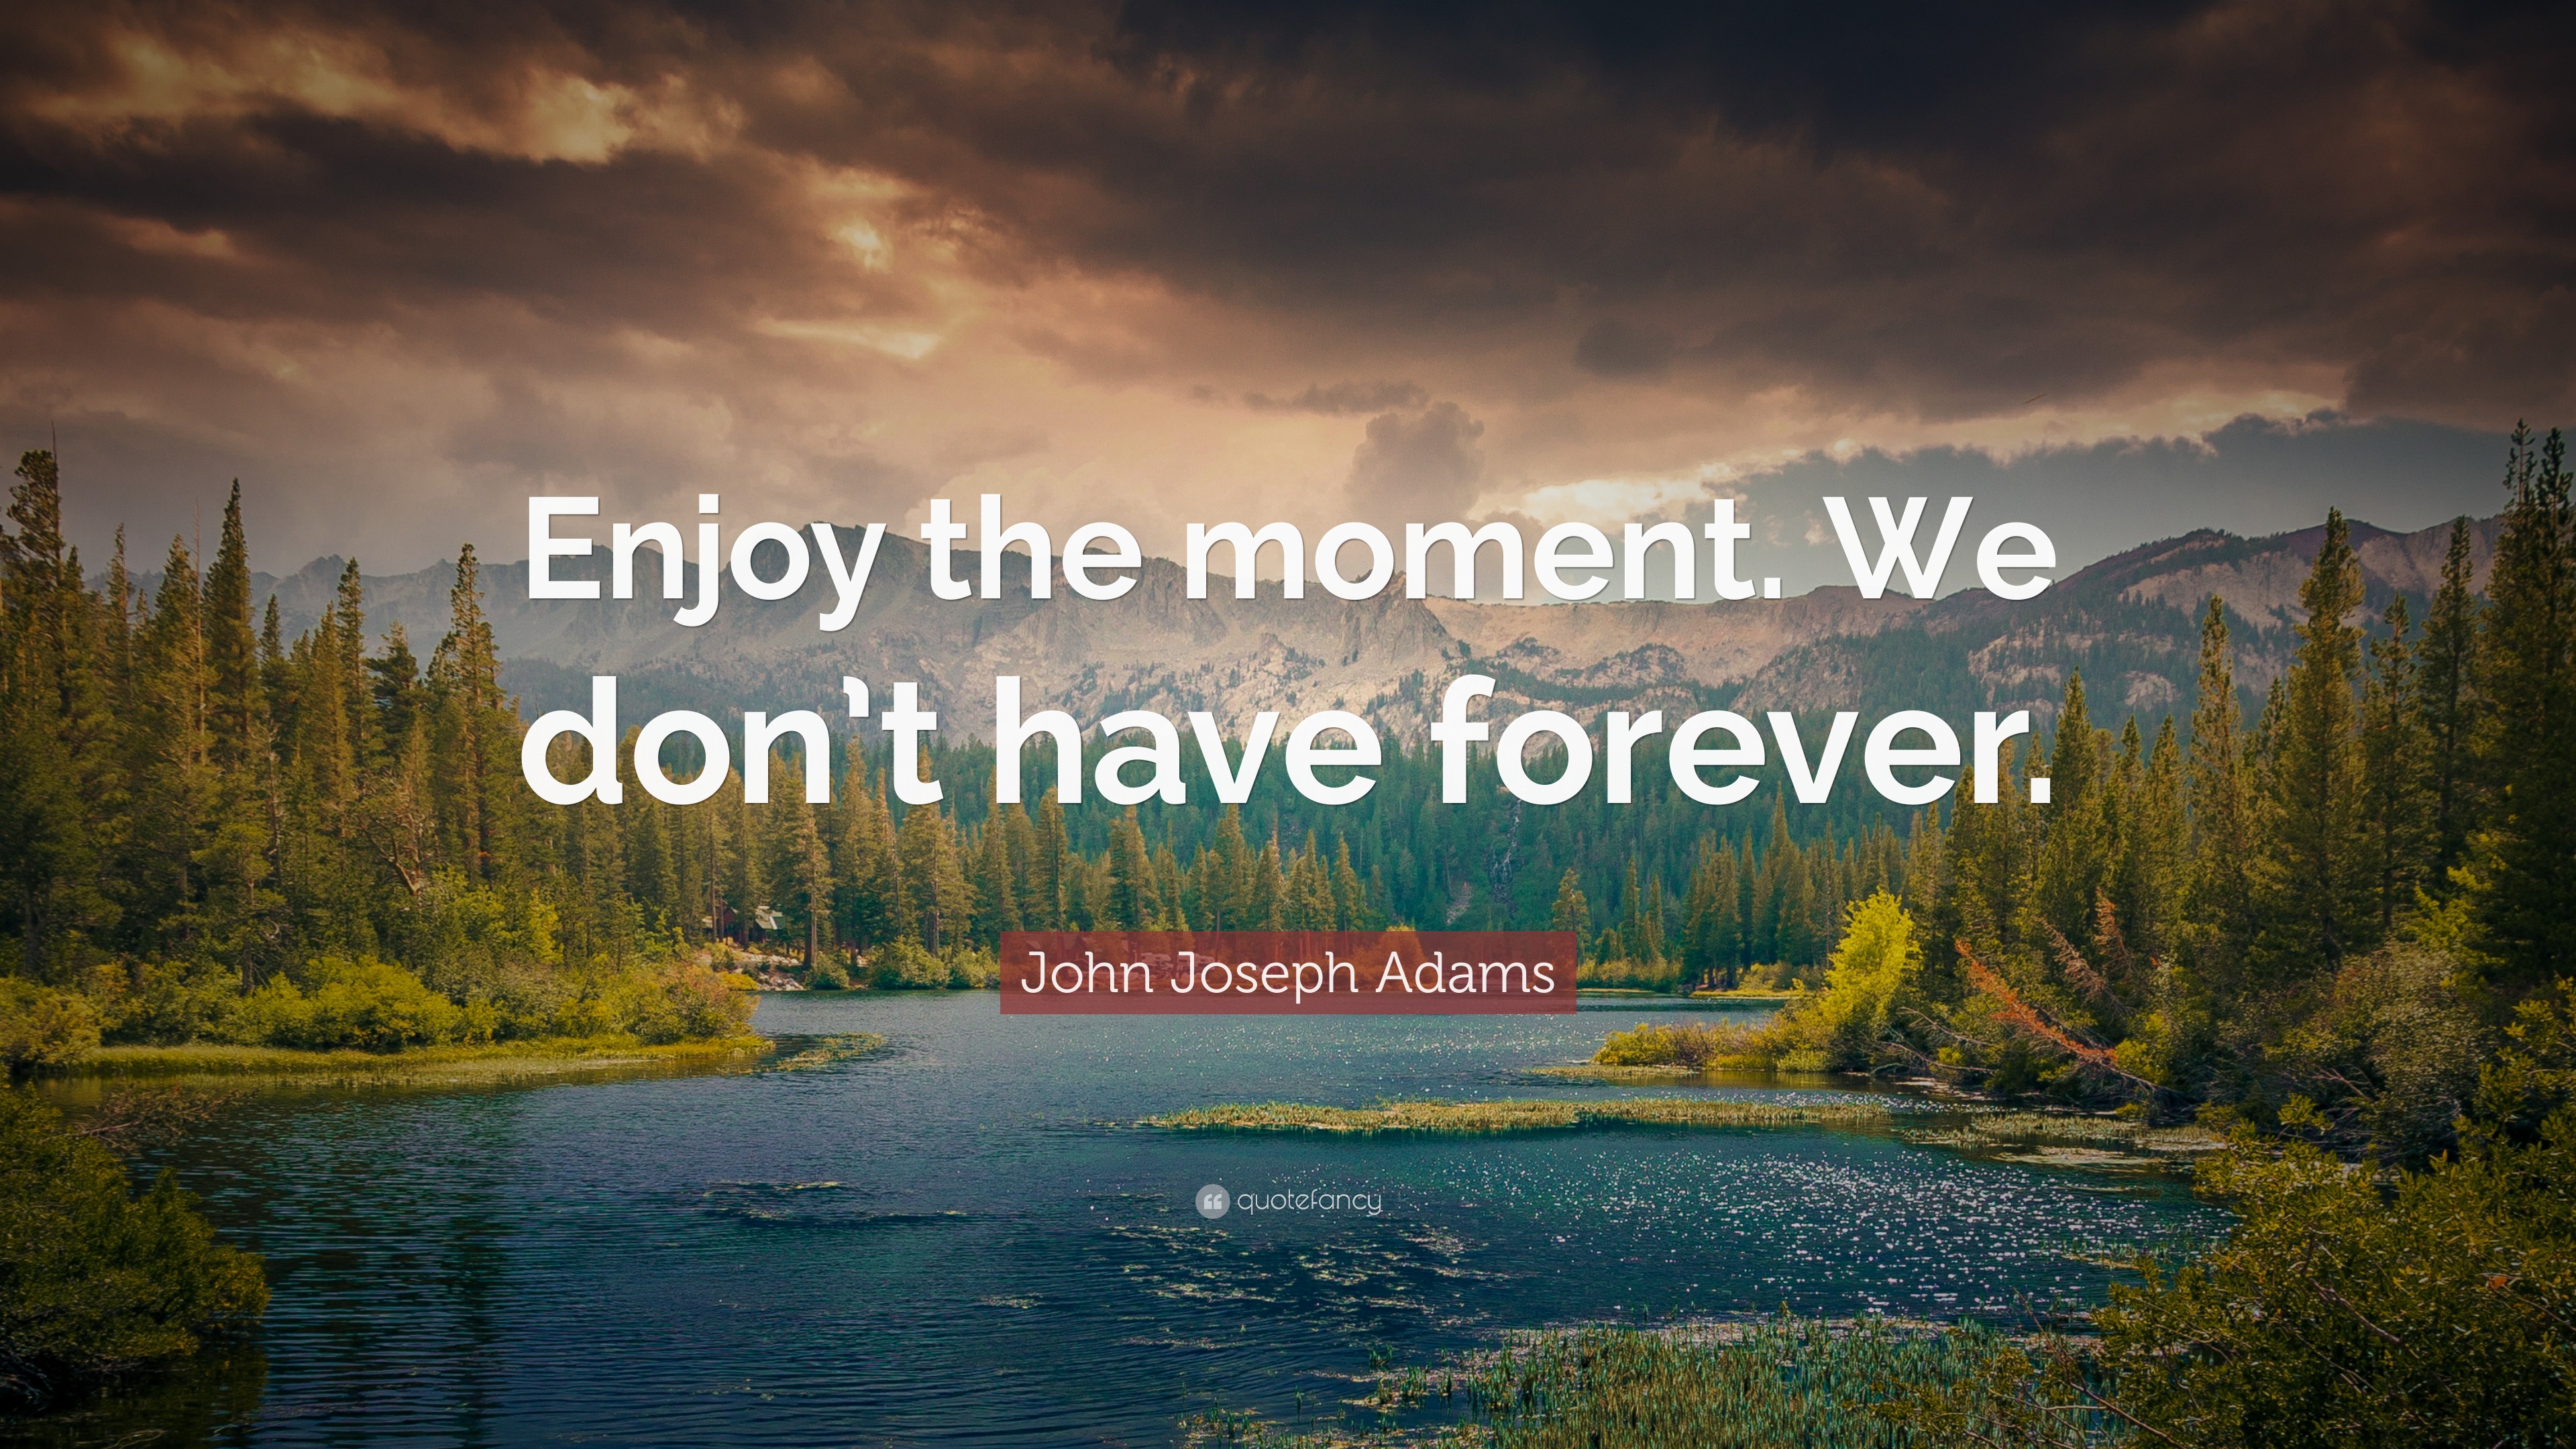 John Joseph Adams Quote: “Enjoy the moment. We don't have forever.”